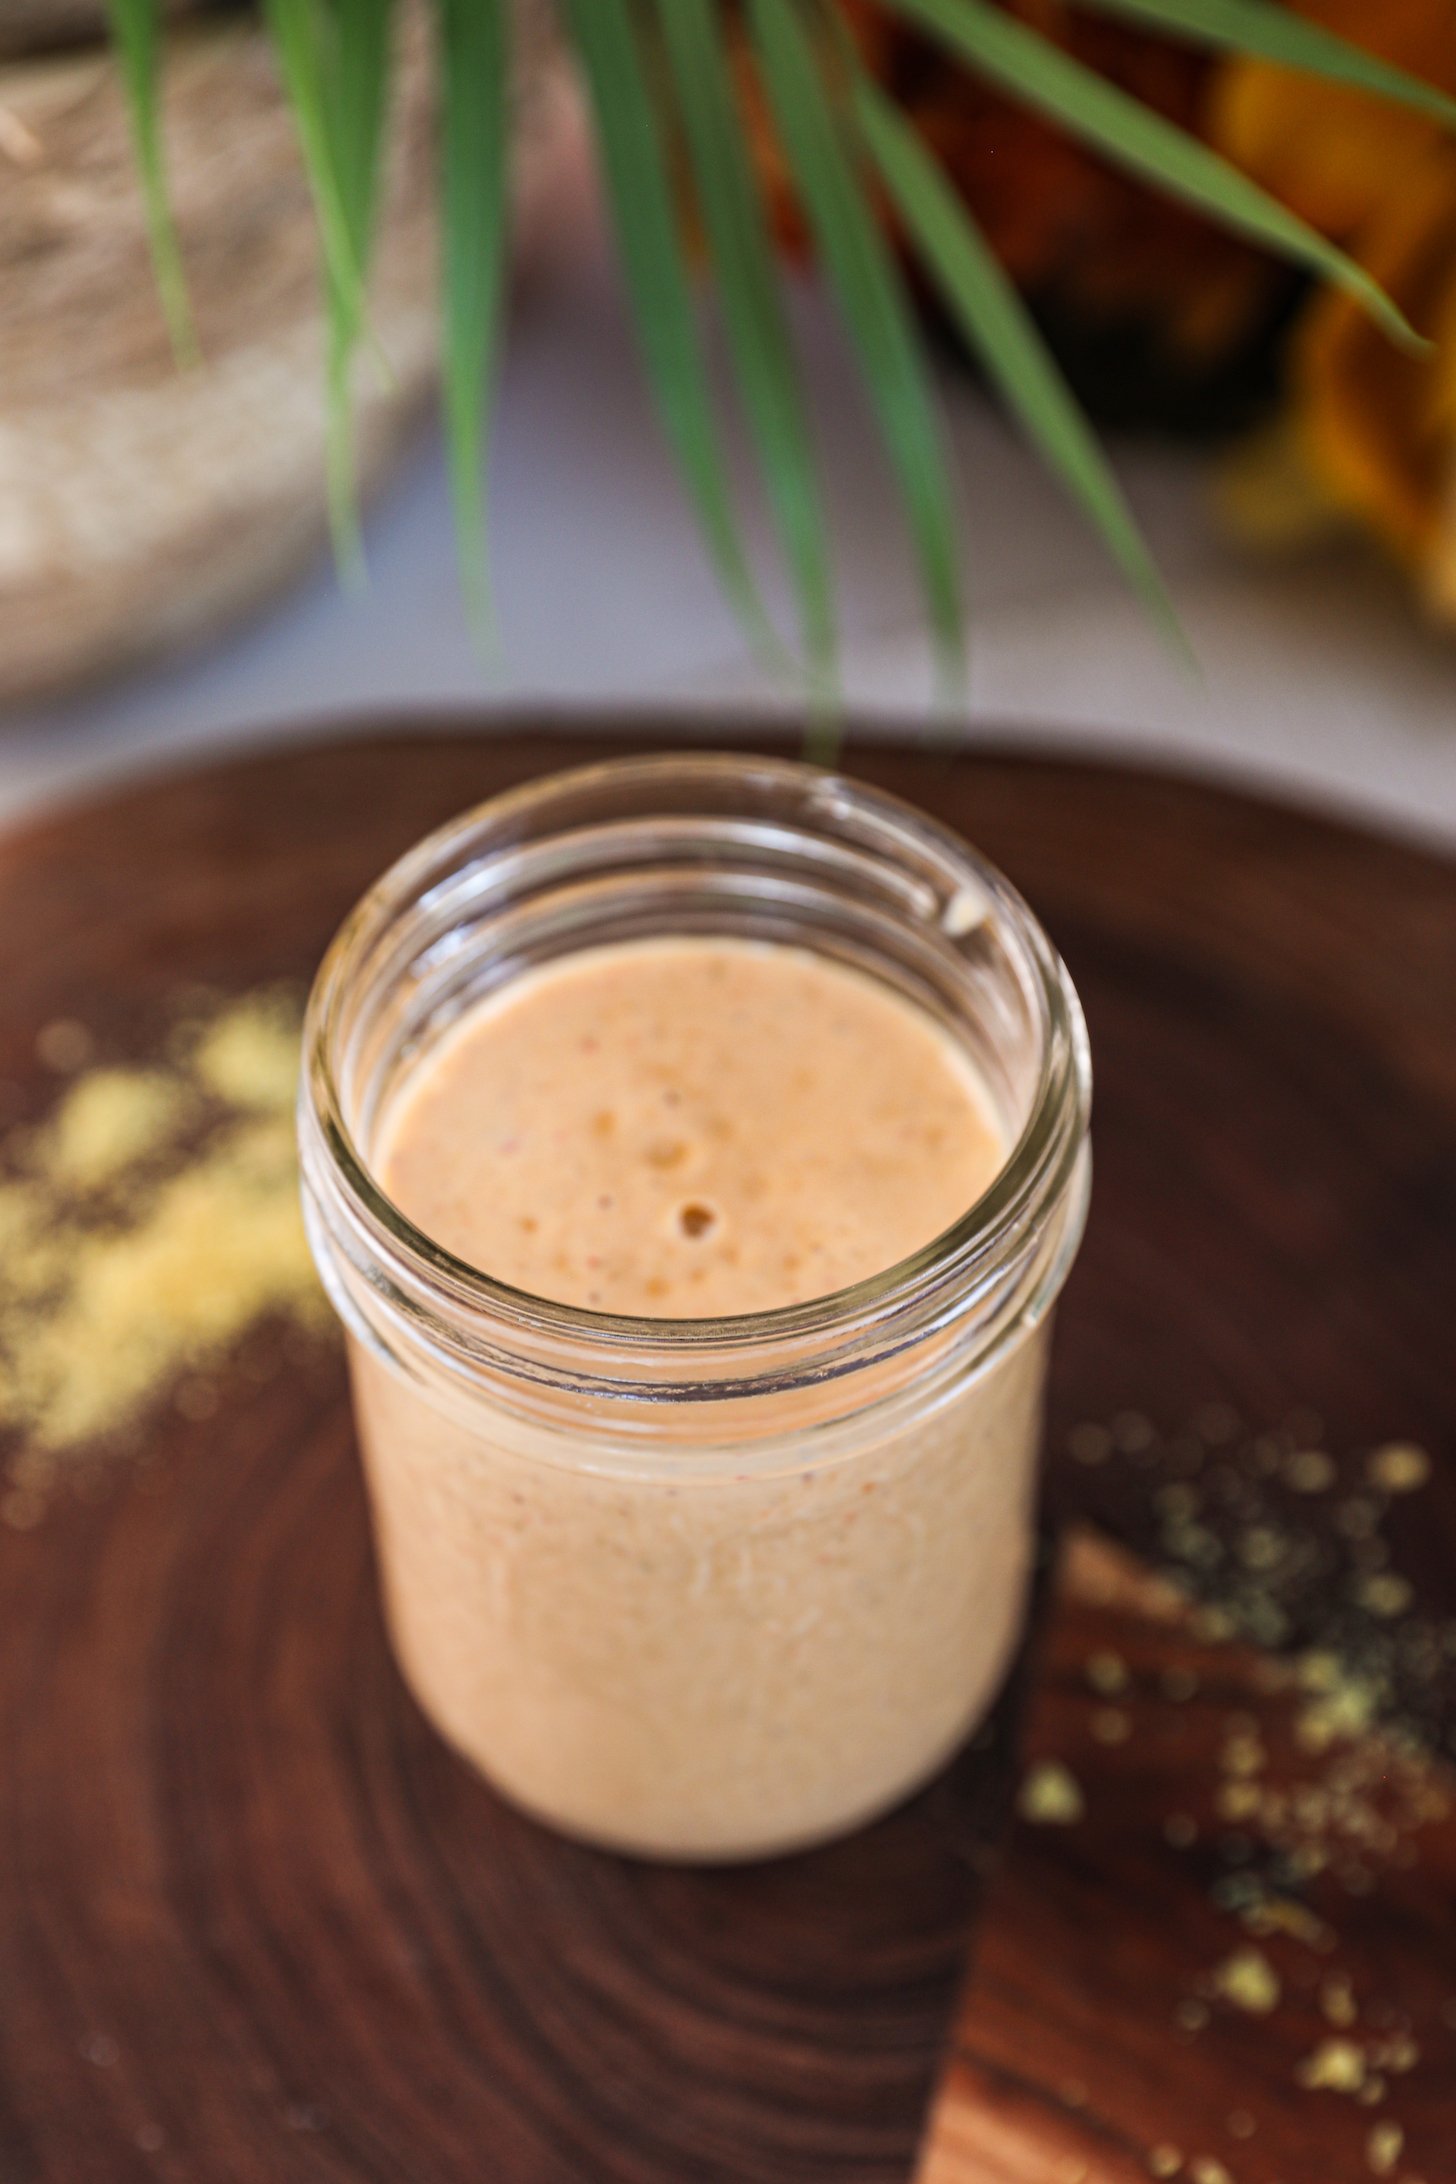 Perspective view of a mason jar of yellow dressing with a plant in the background.